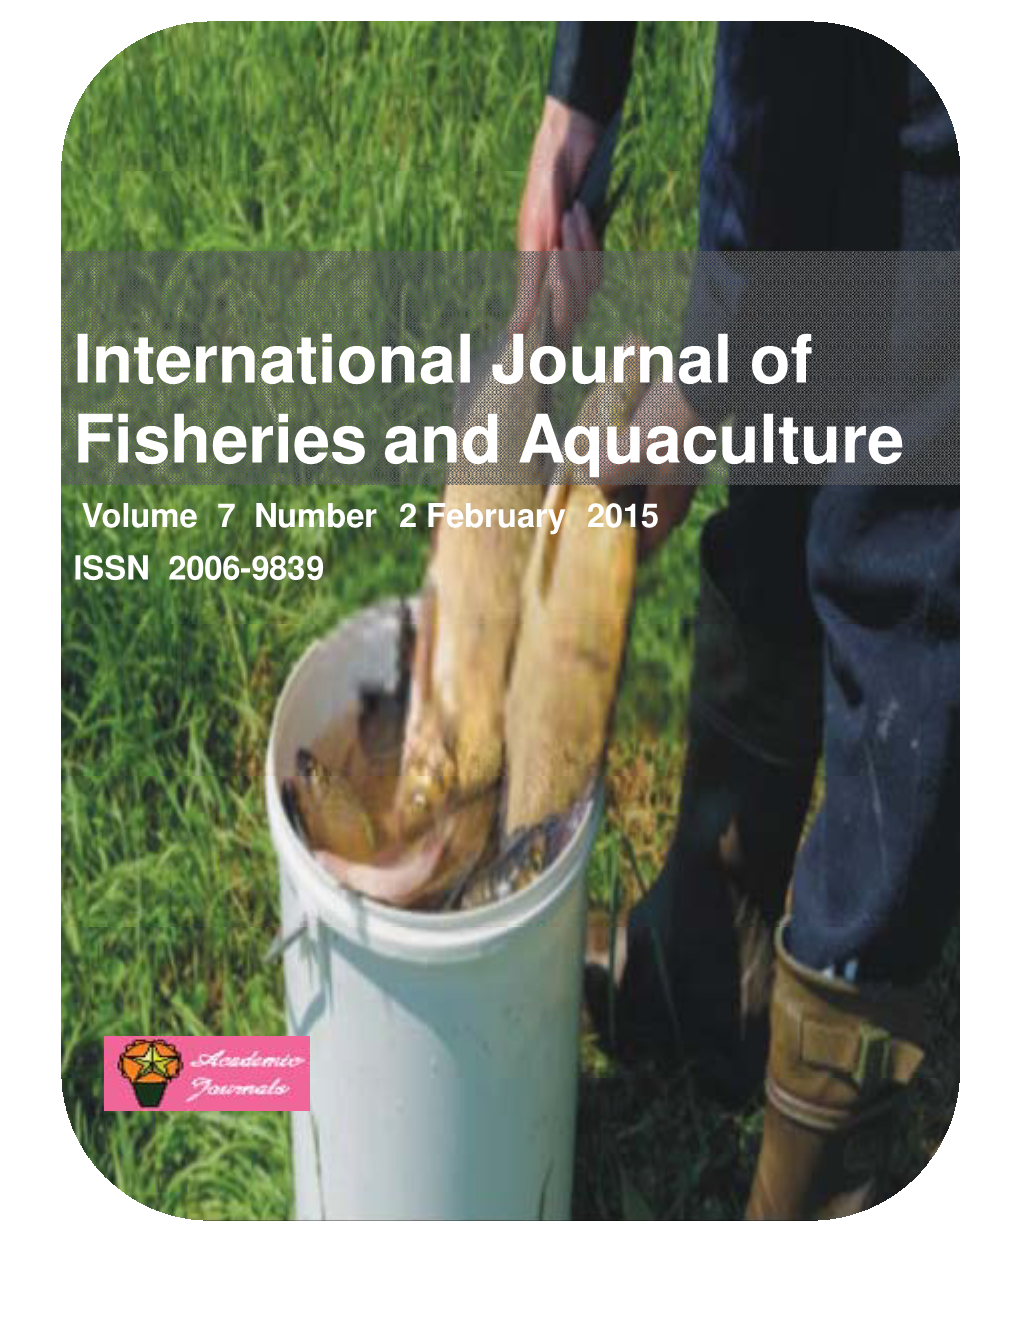 International Journal of Fisheries and Aquaculture Volume 7 Number 2 February 2015 ISSN 2006-9839